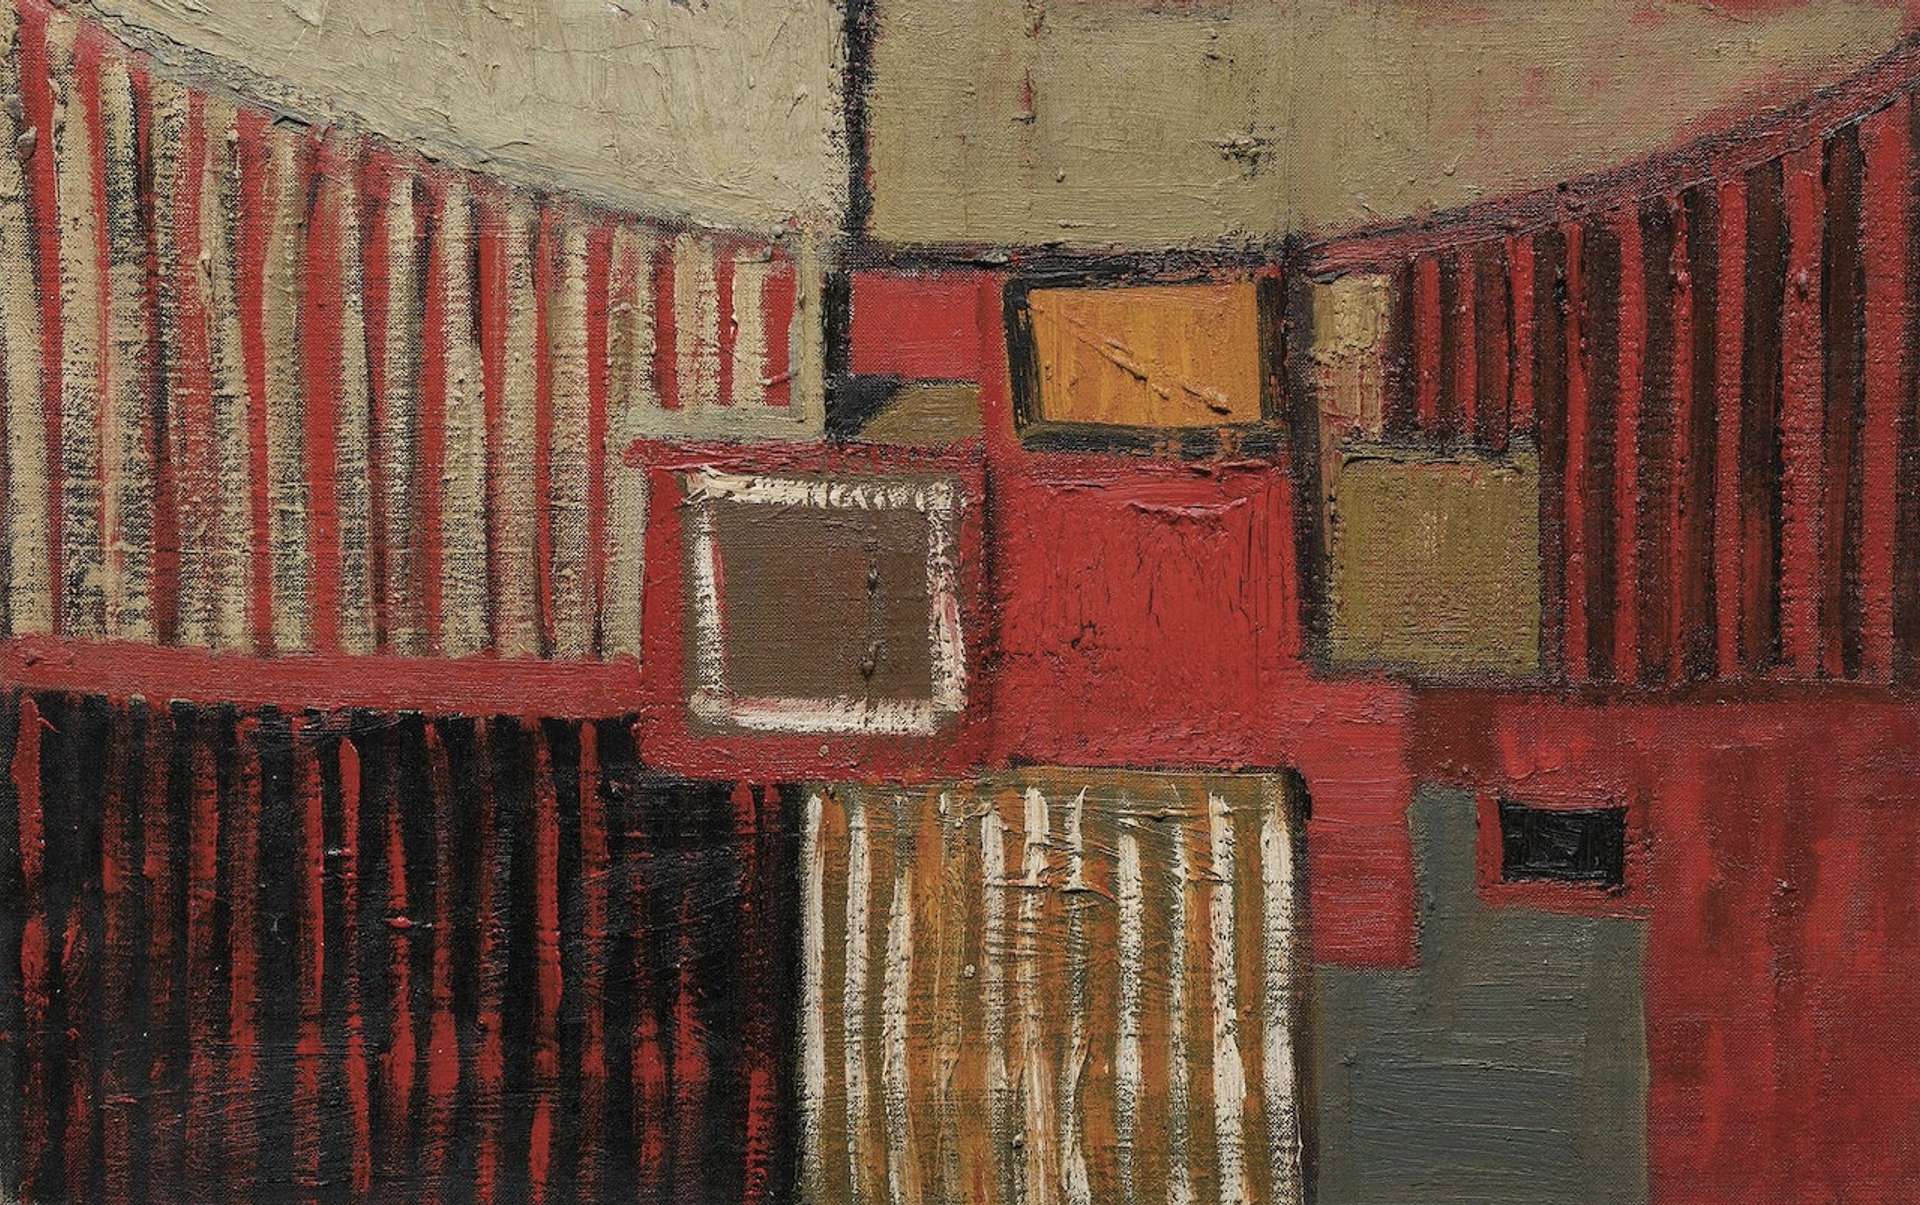 An abstracted canvas divided into uneven quarter sections, each further interrupted by various squares emanating from the center. The canvas showcases hues of red, beige, black, and grey.